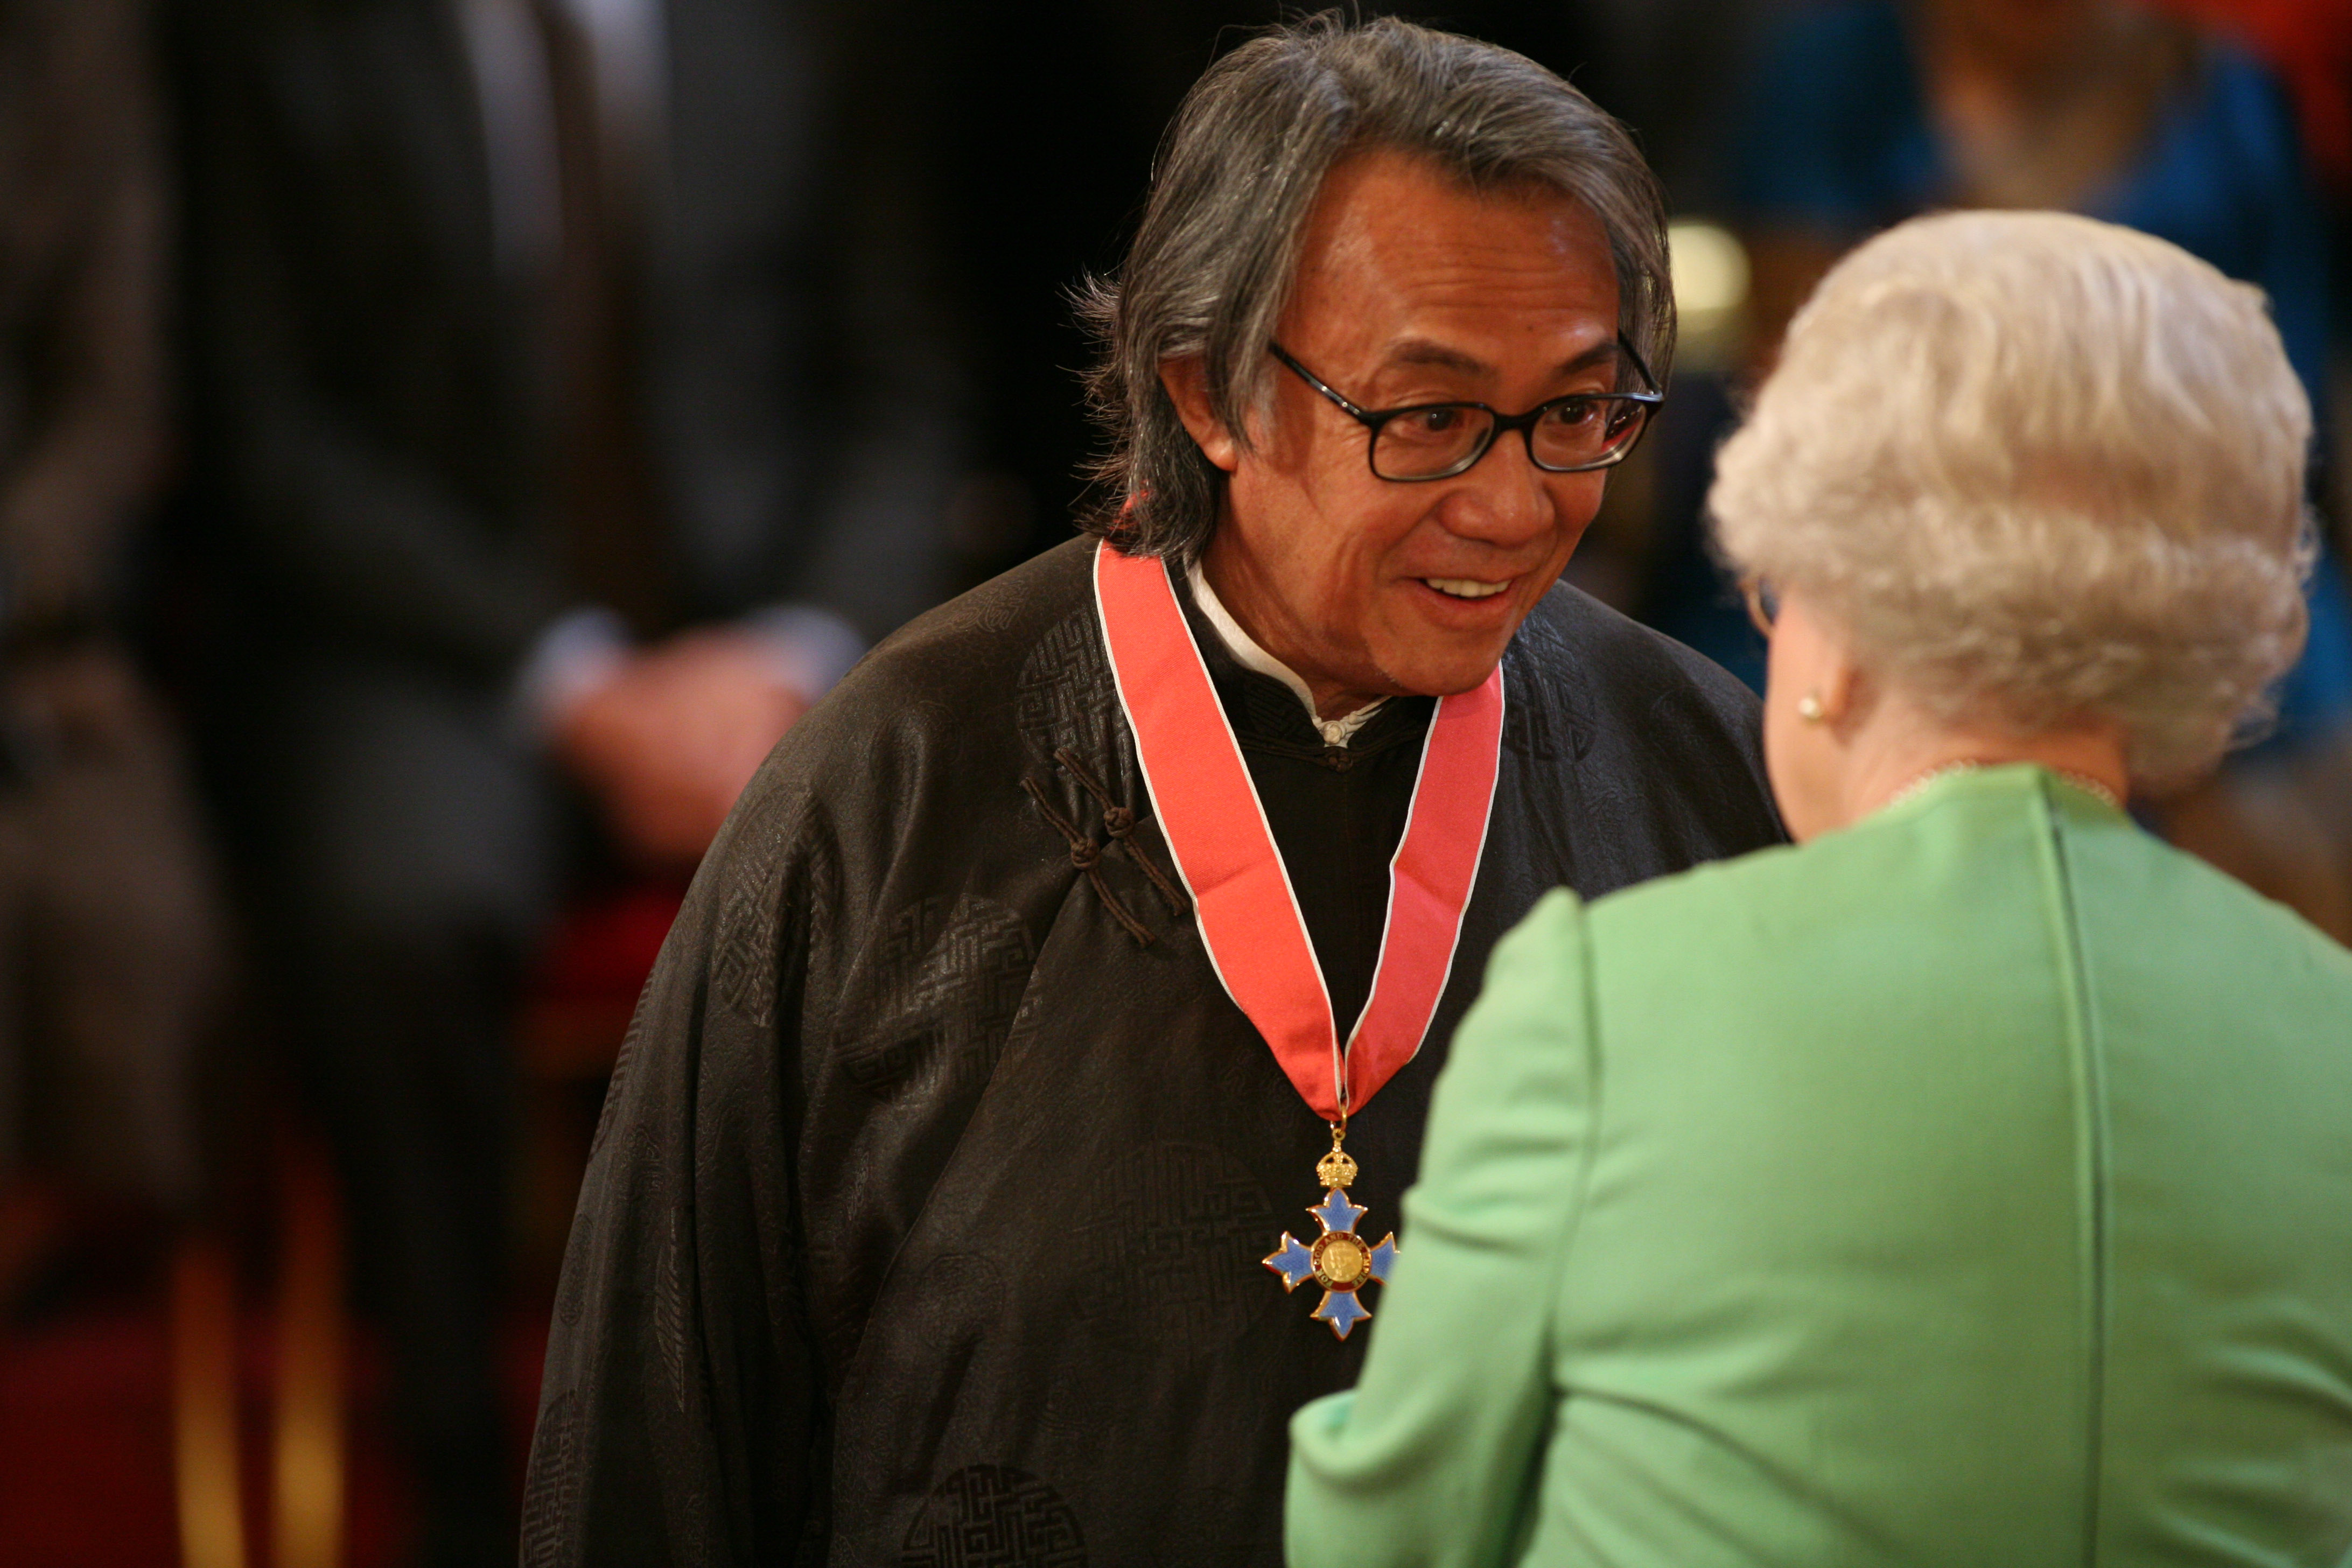 Sir David Tang is knighted by the Queen at Buckingham Palace in February 2008. (Lewis Whyld—PA Images via Getty Images)